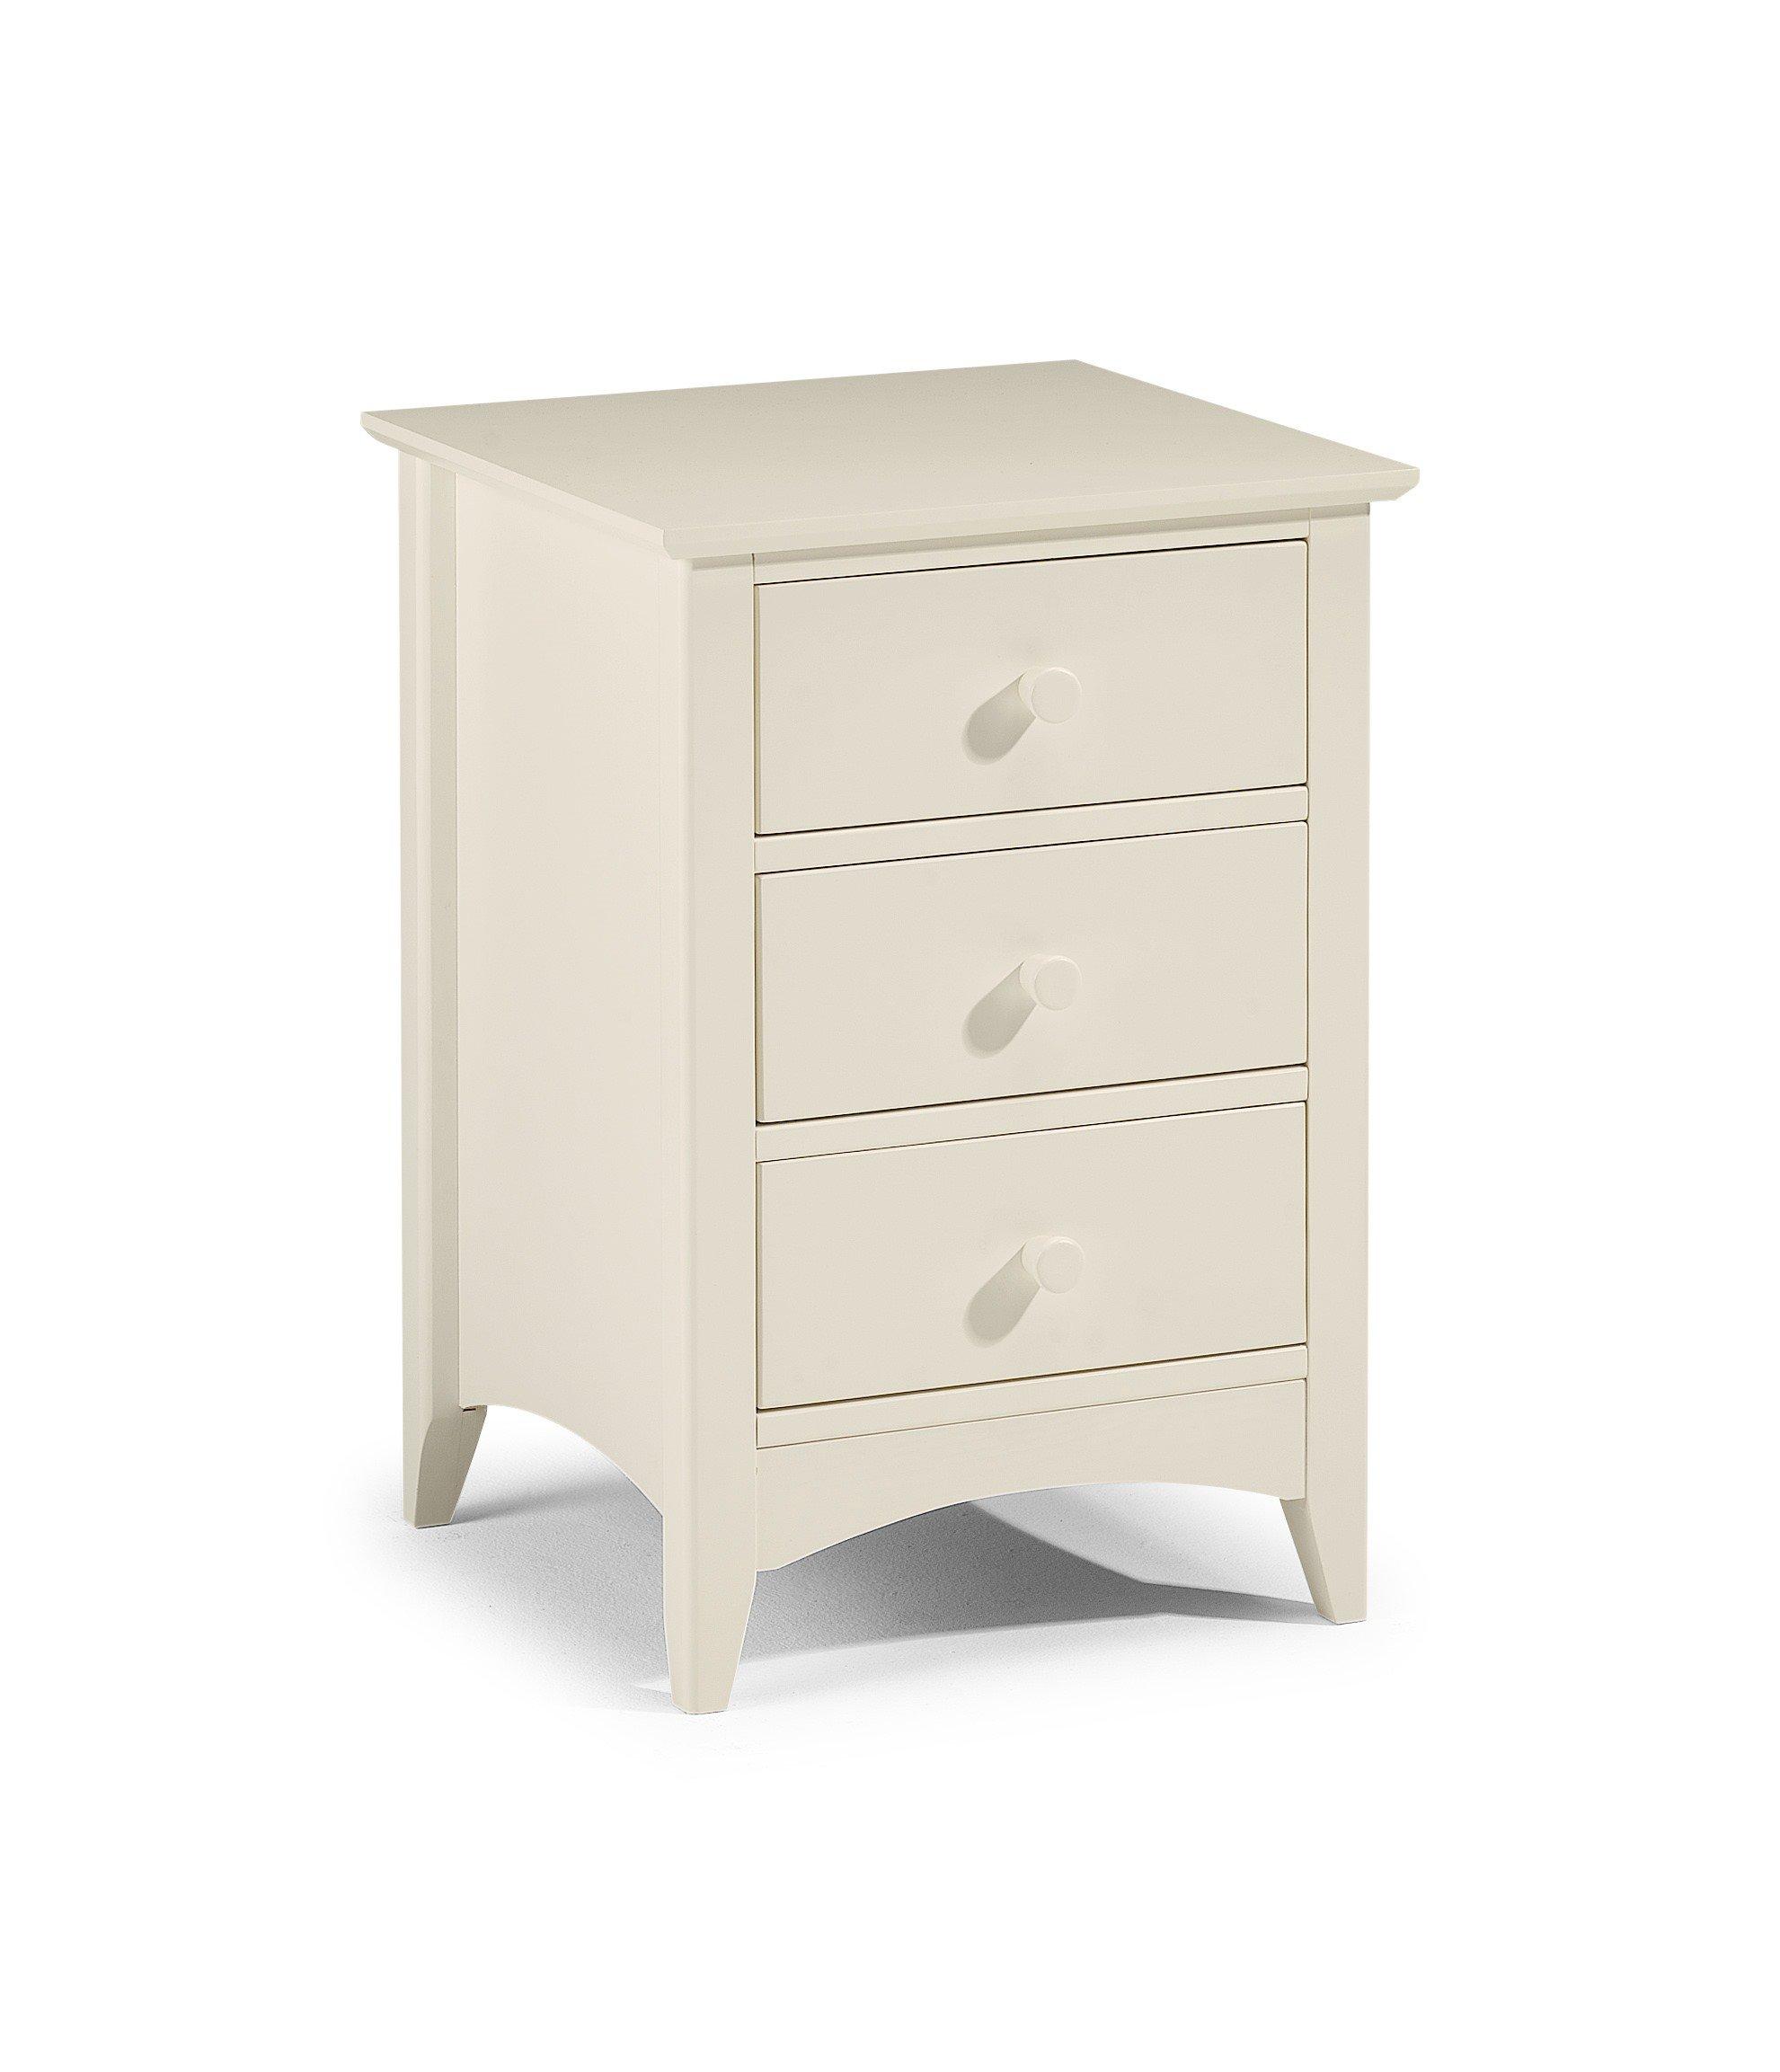 Stone White Bedside Drawer (3 Drawers)